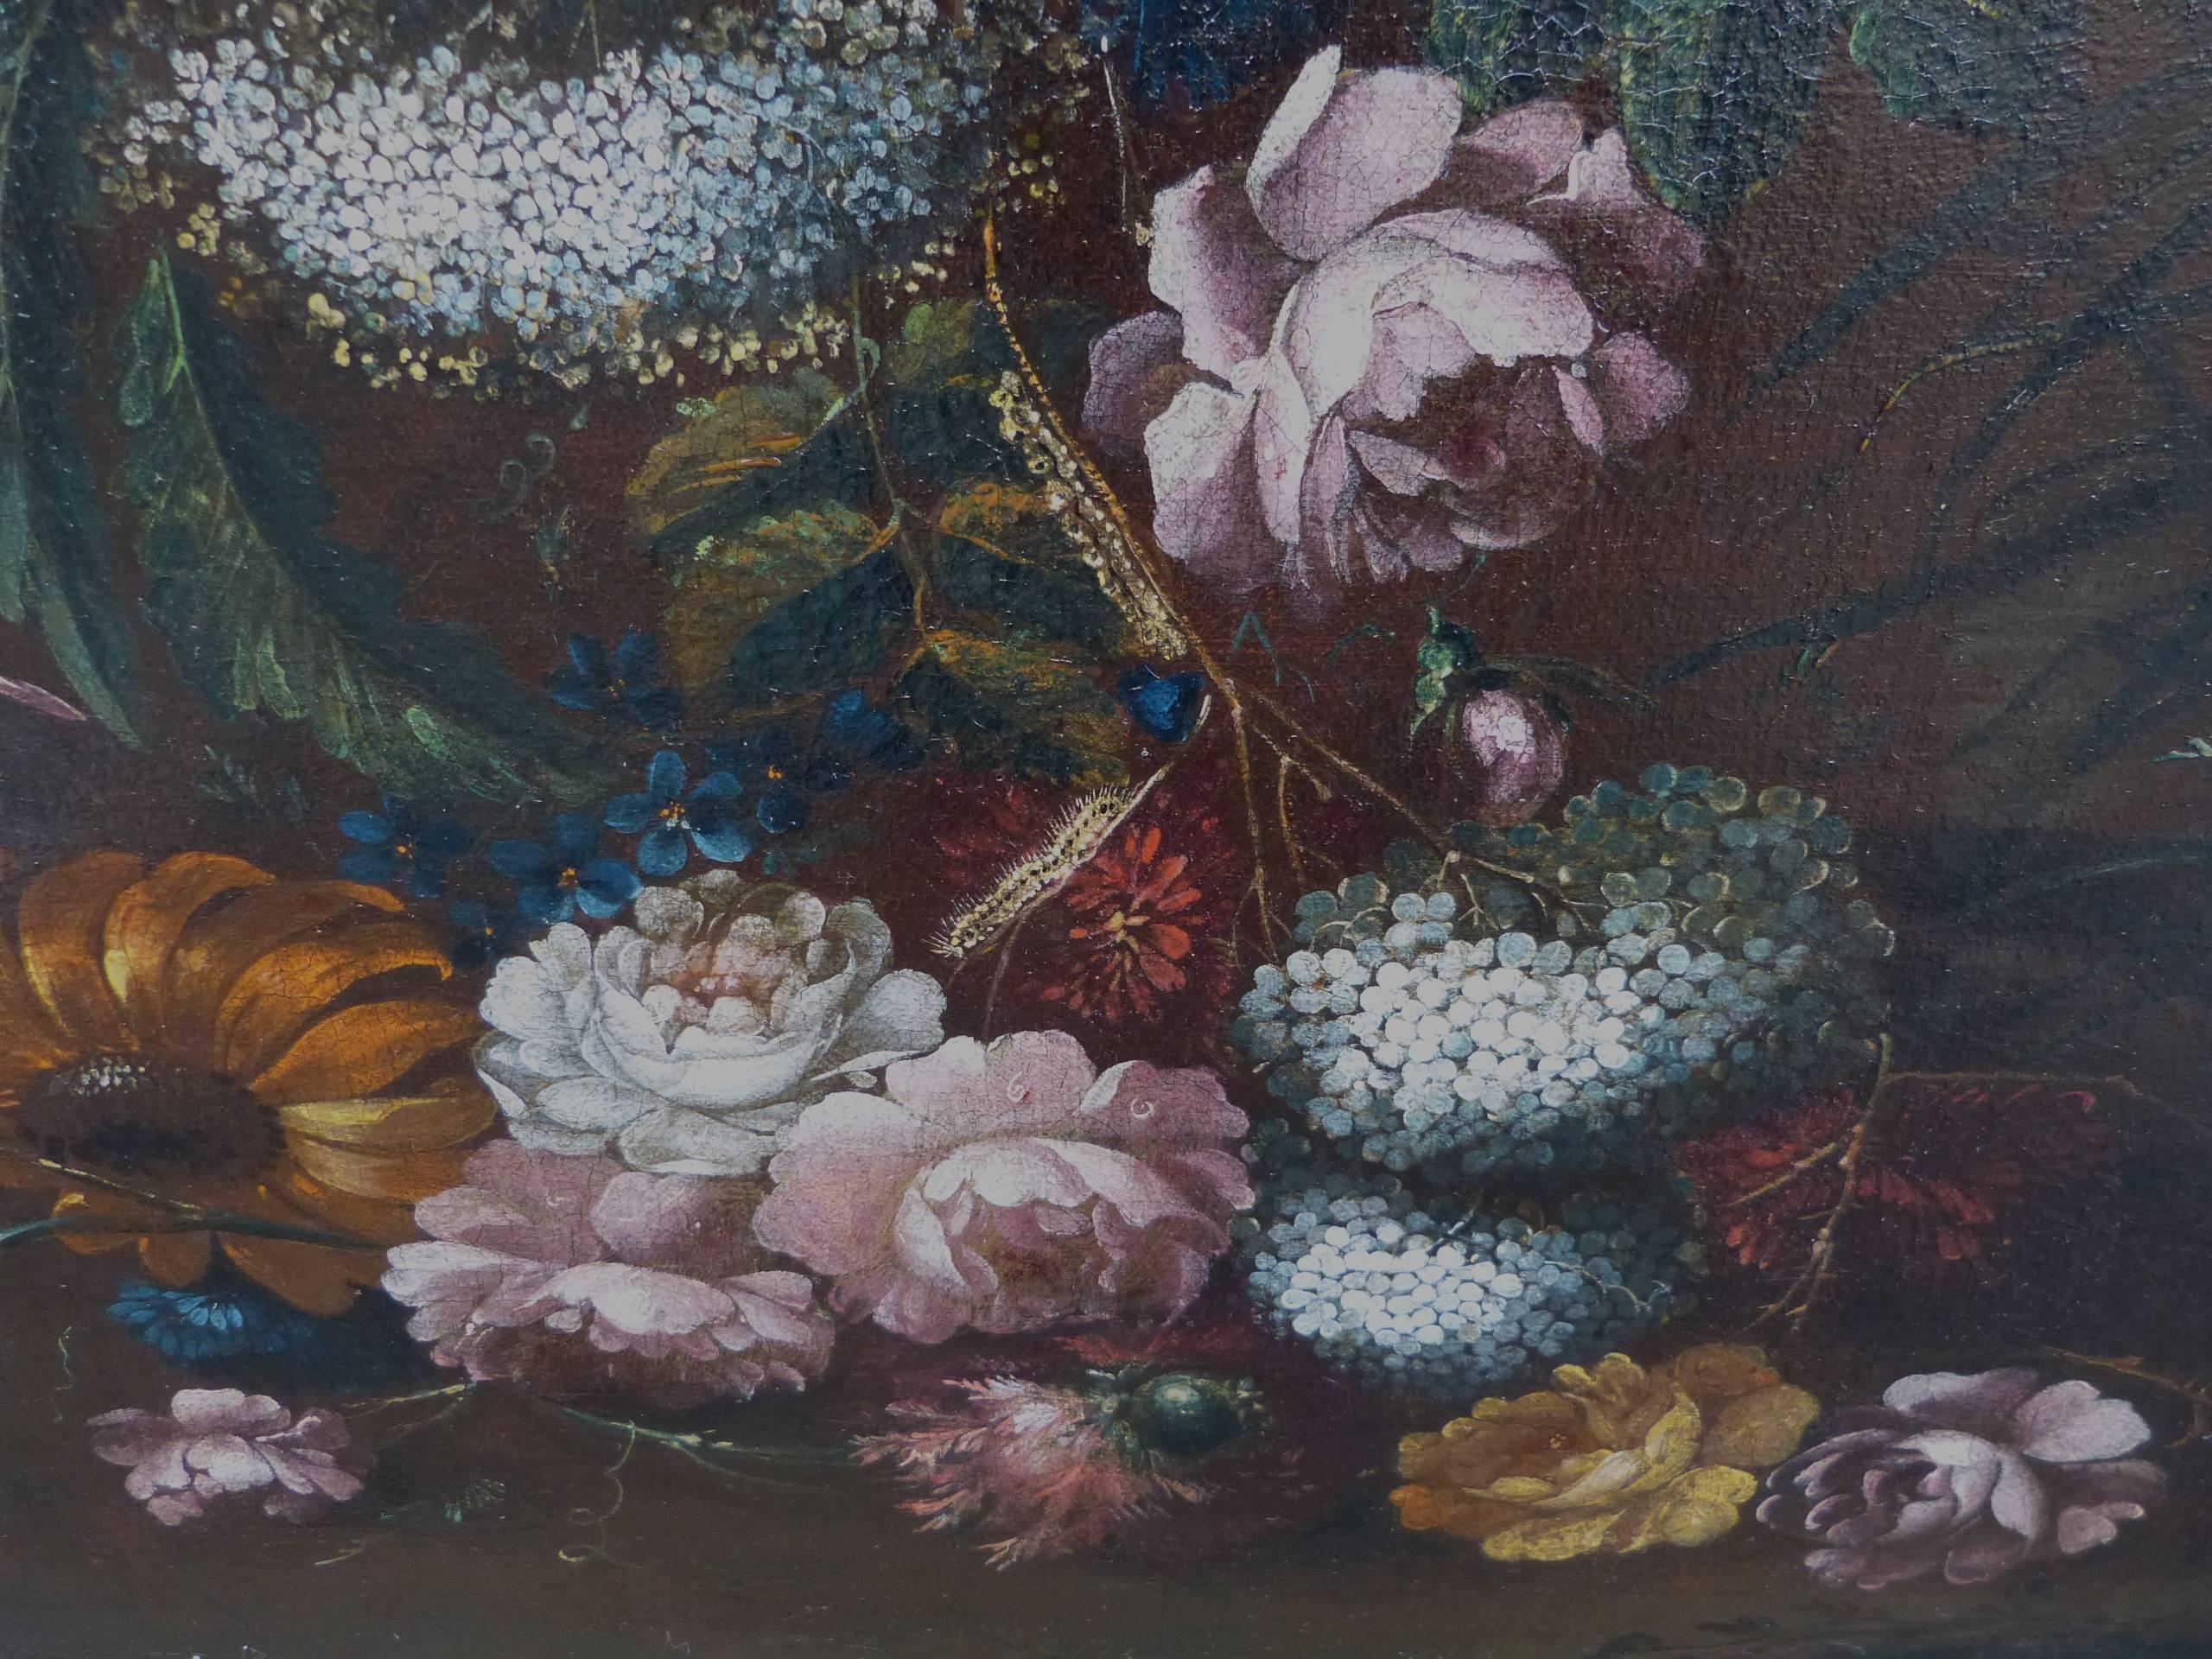 A fine 17th century rococo still life painting of an abundance flowers and caterpillars.
Bottom right side detail showing a typical plant Marchioni used in some of her still life paintings. For two examples, see 